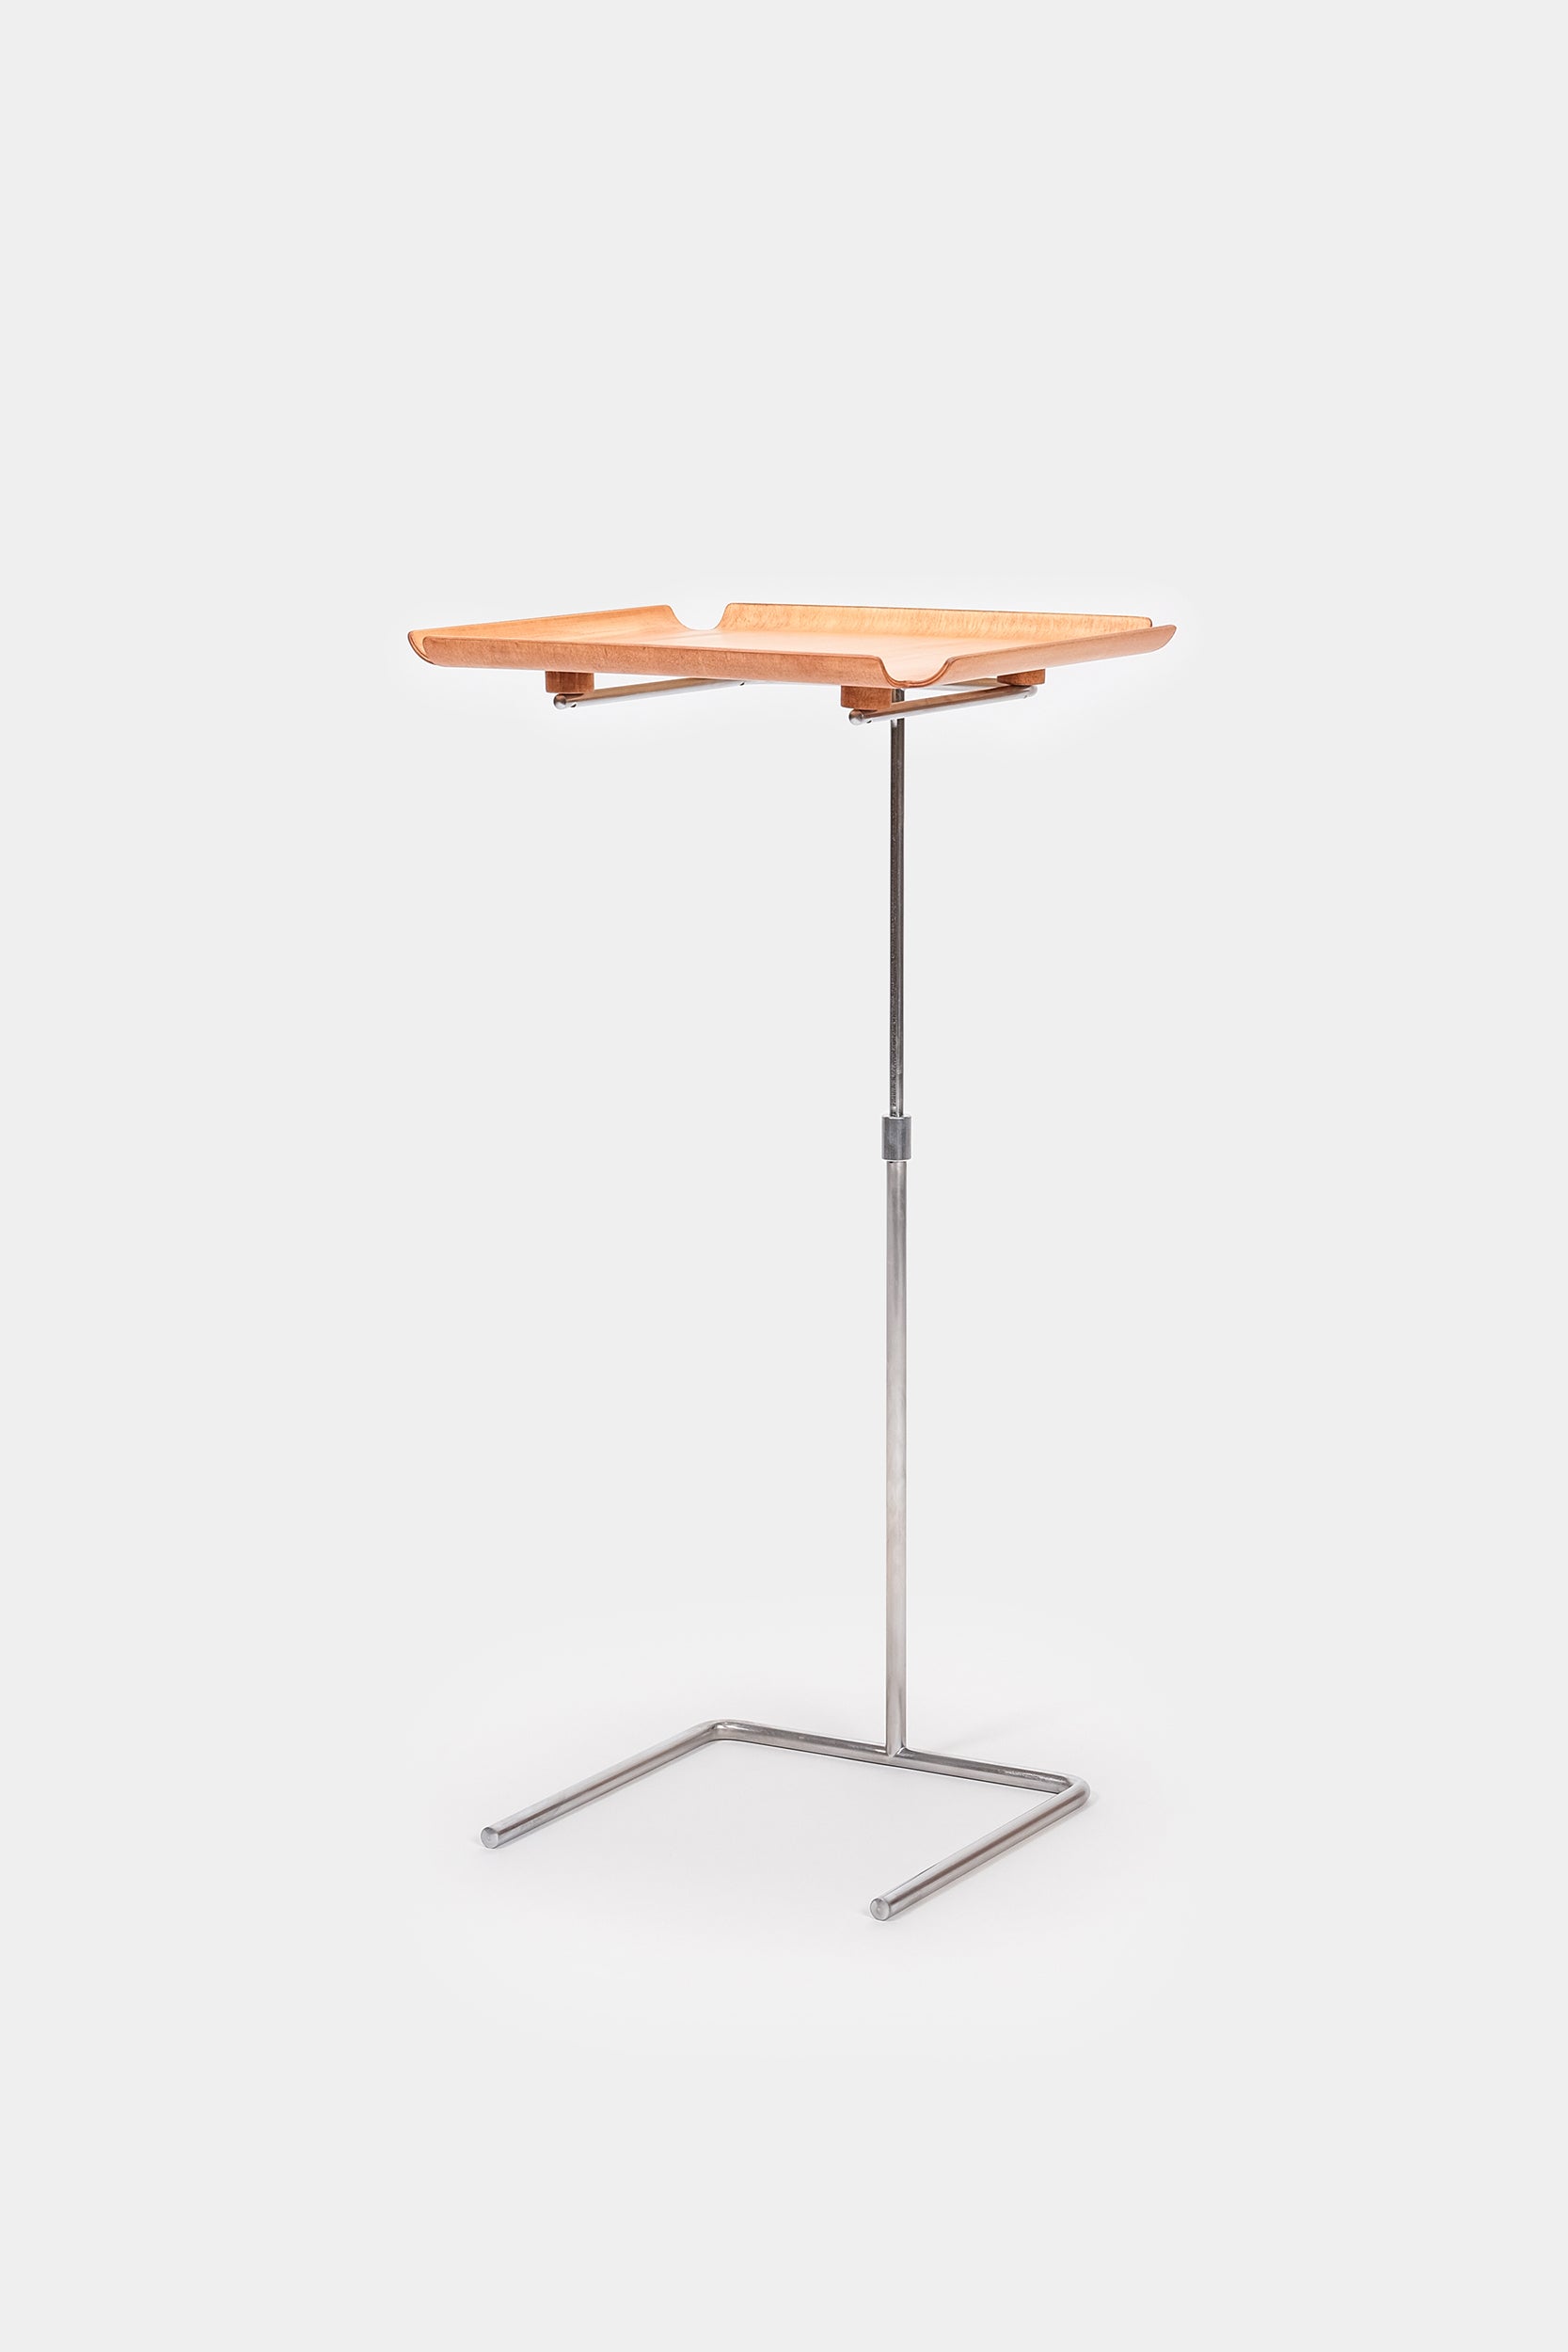 George Nelson Vitra side table, 80s